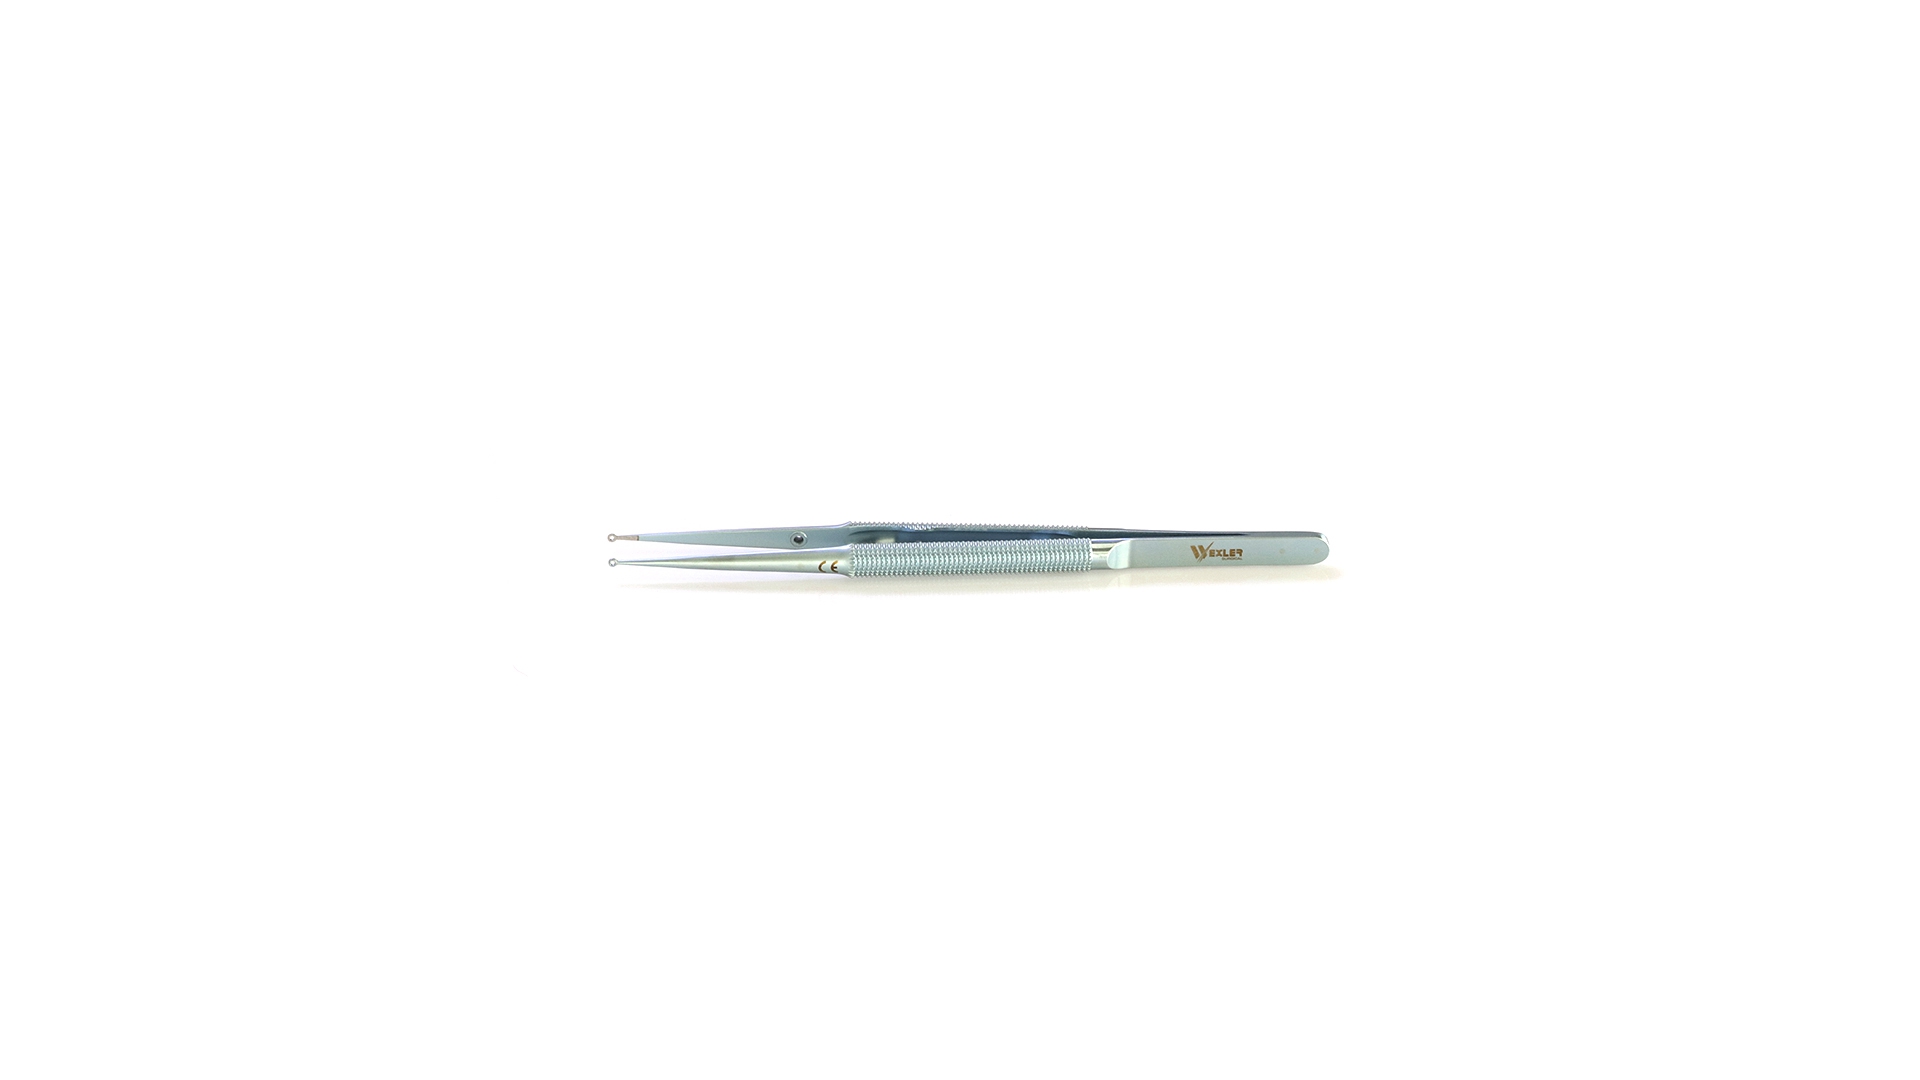 Ring tip Forceps - Straight 2mm TC coated rings